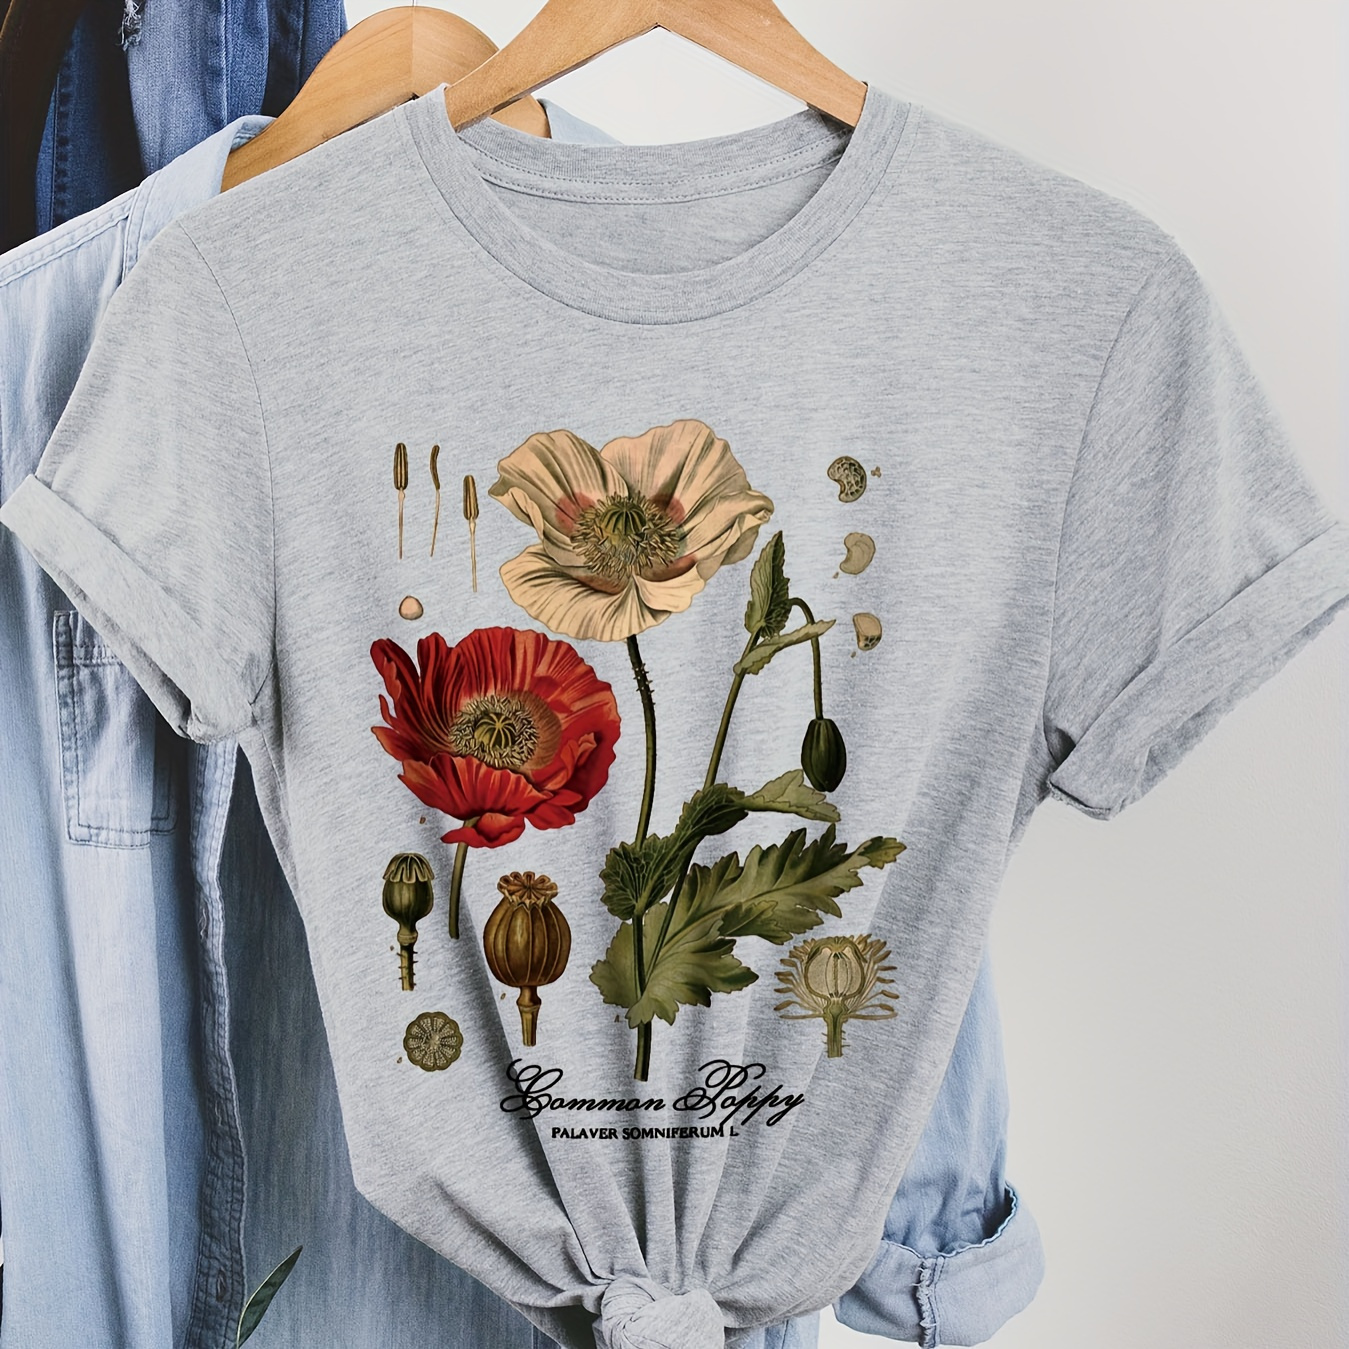 

T-shirt With A Retro Flower Pattern, Short Sleeves And A Round Neckline, A Stylish Top For The Summer And Spring, Women's Fashion